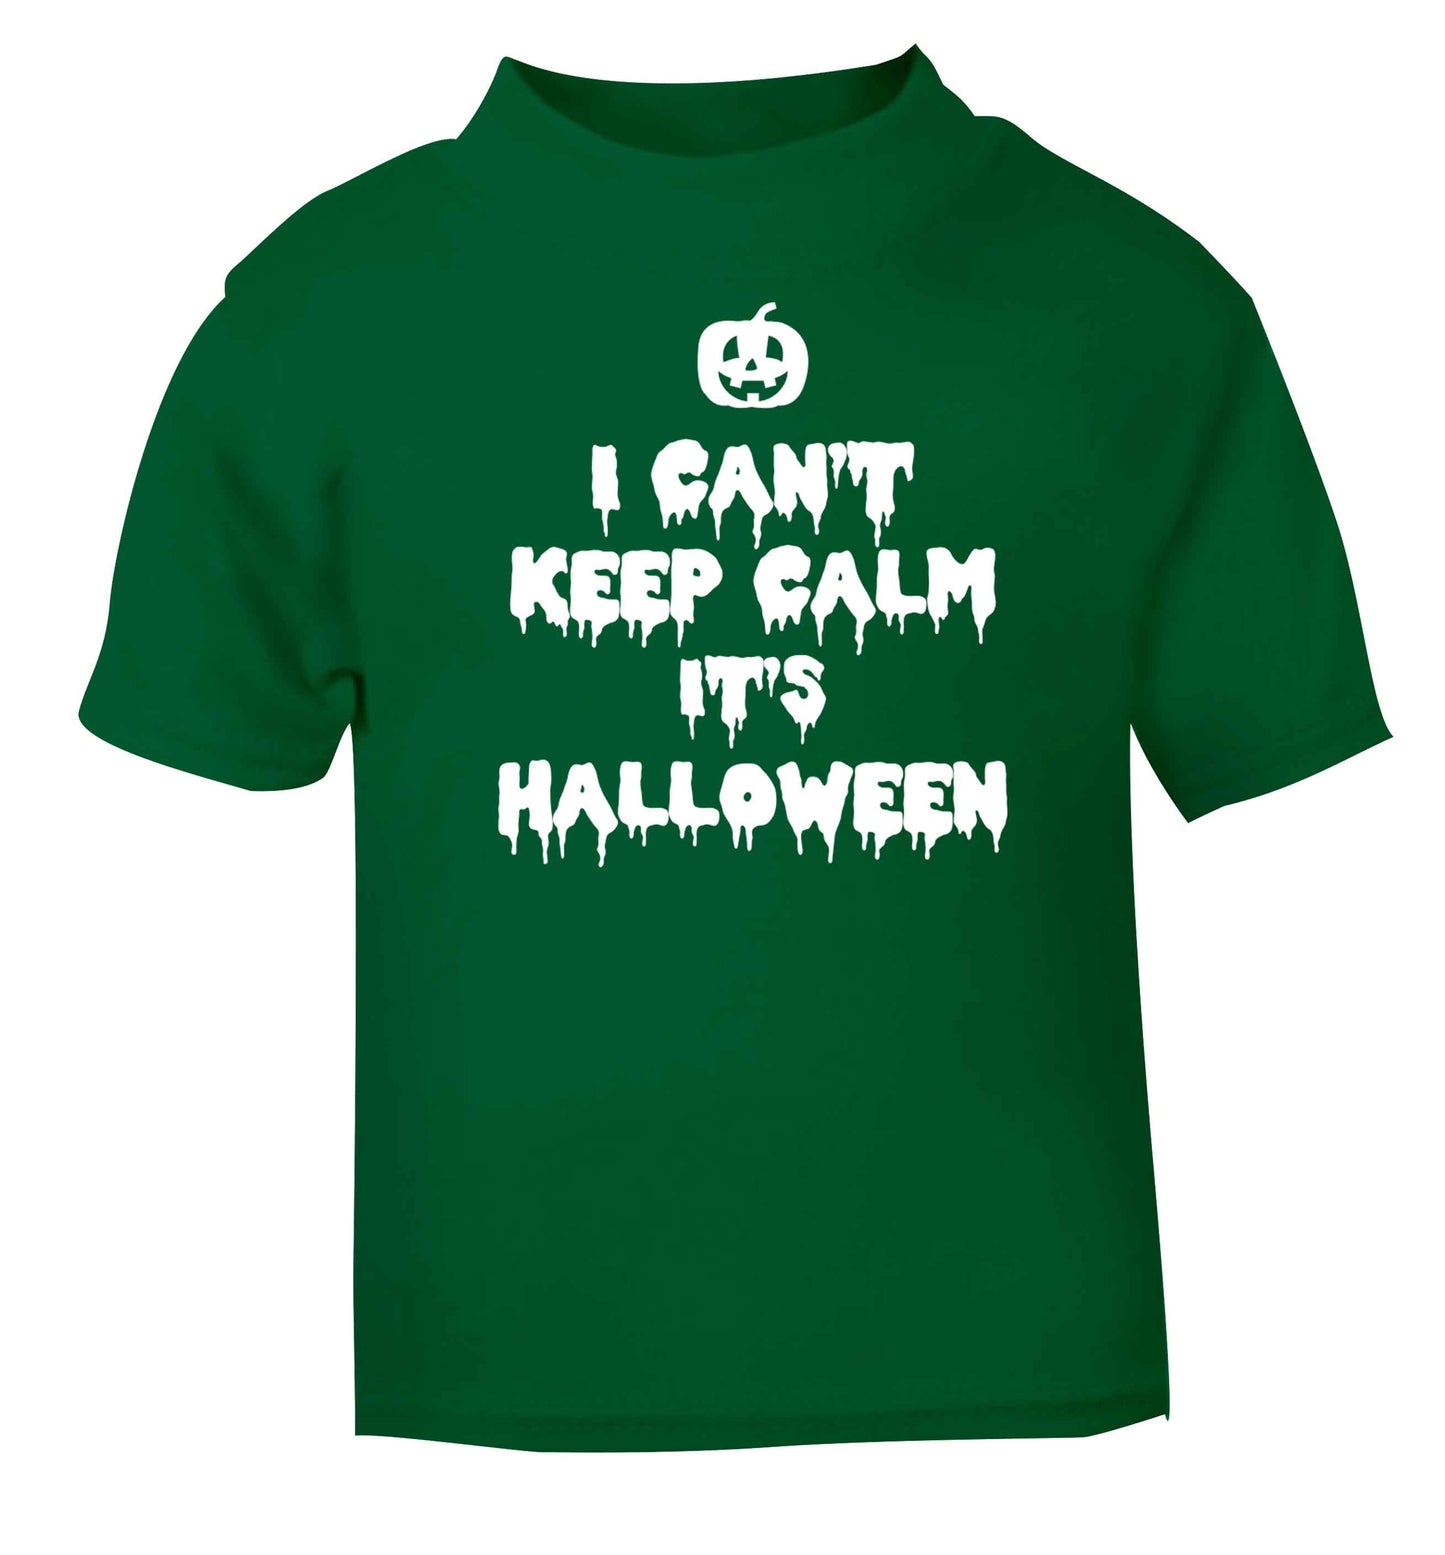 I can't keep calm it's halloween green baby toddler Tshirt 2 Years